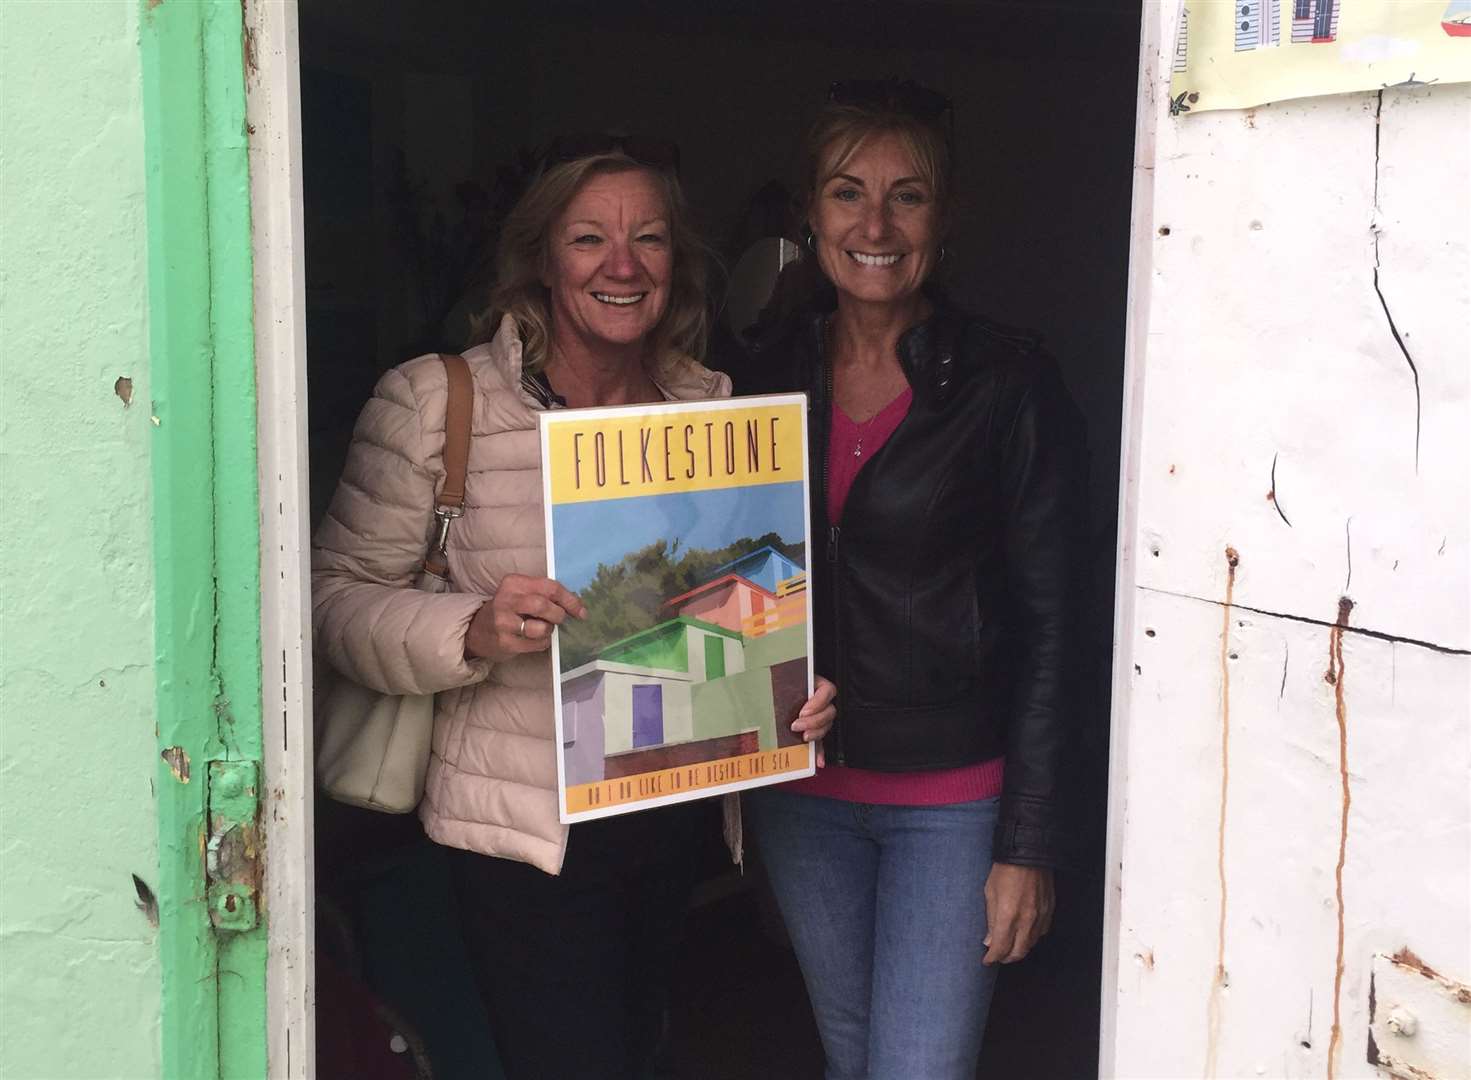 Friends Pippa and Lynne said the huts are part of the town's heritage